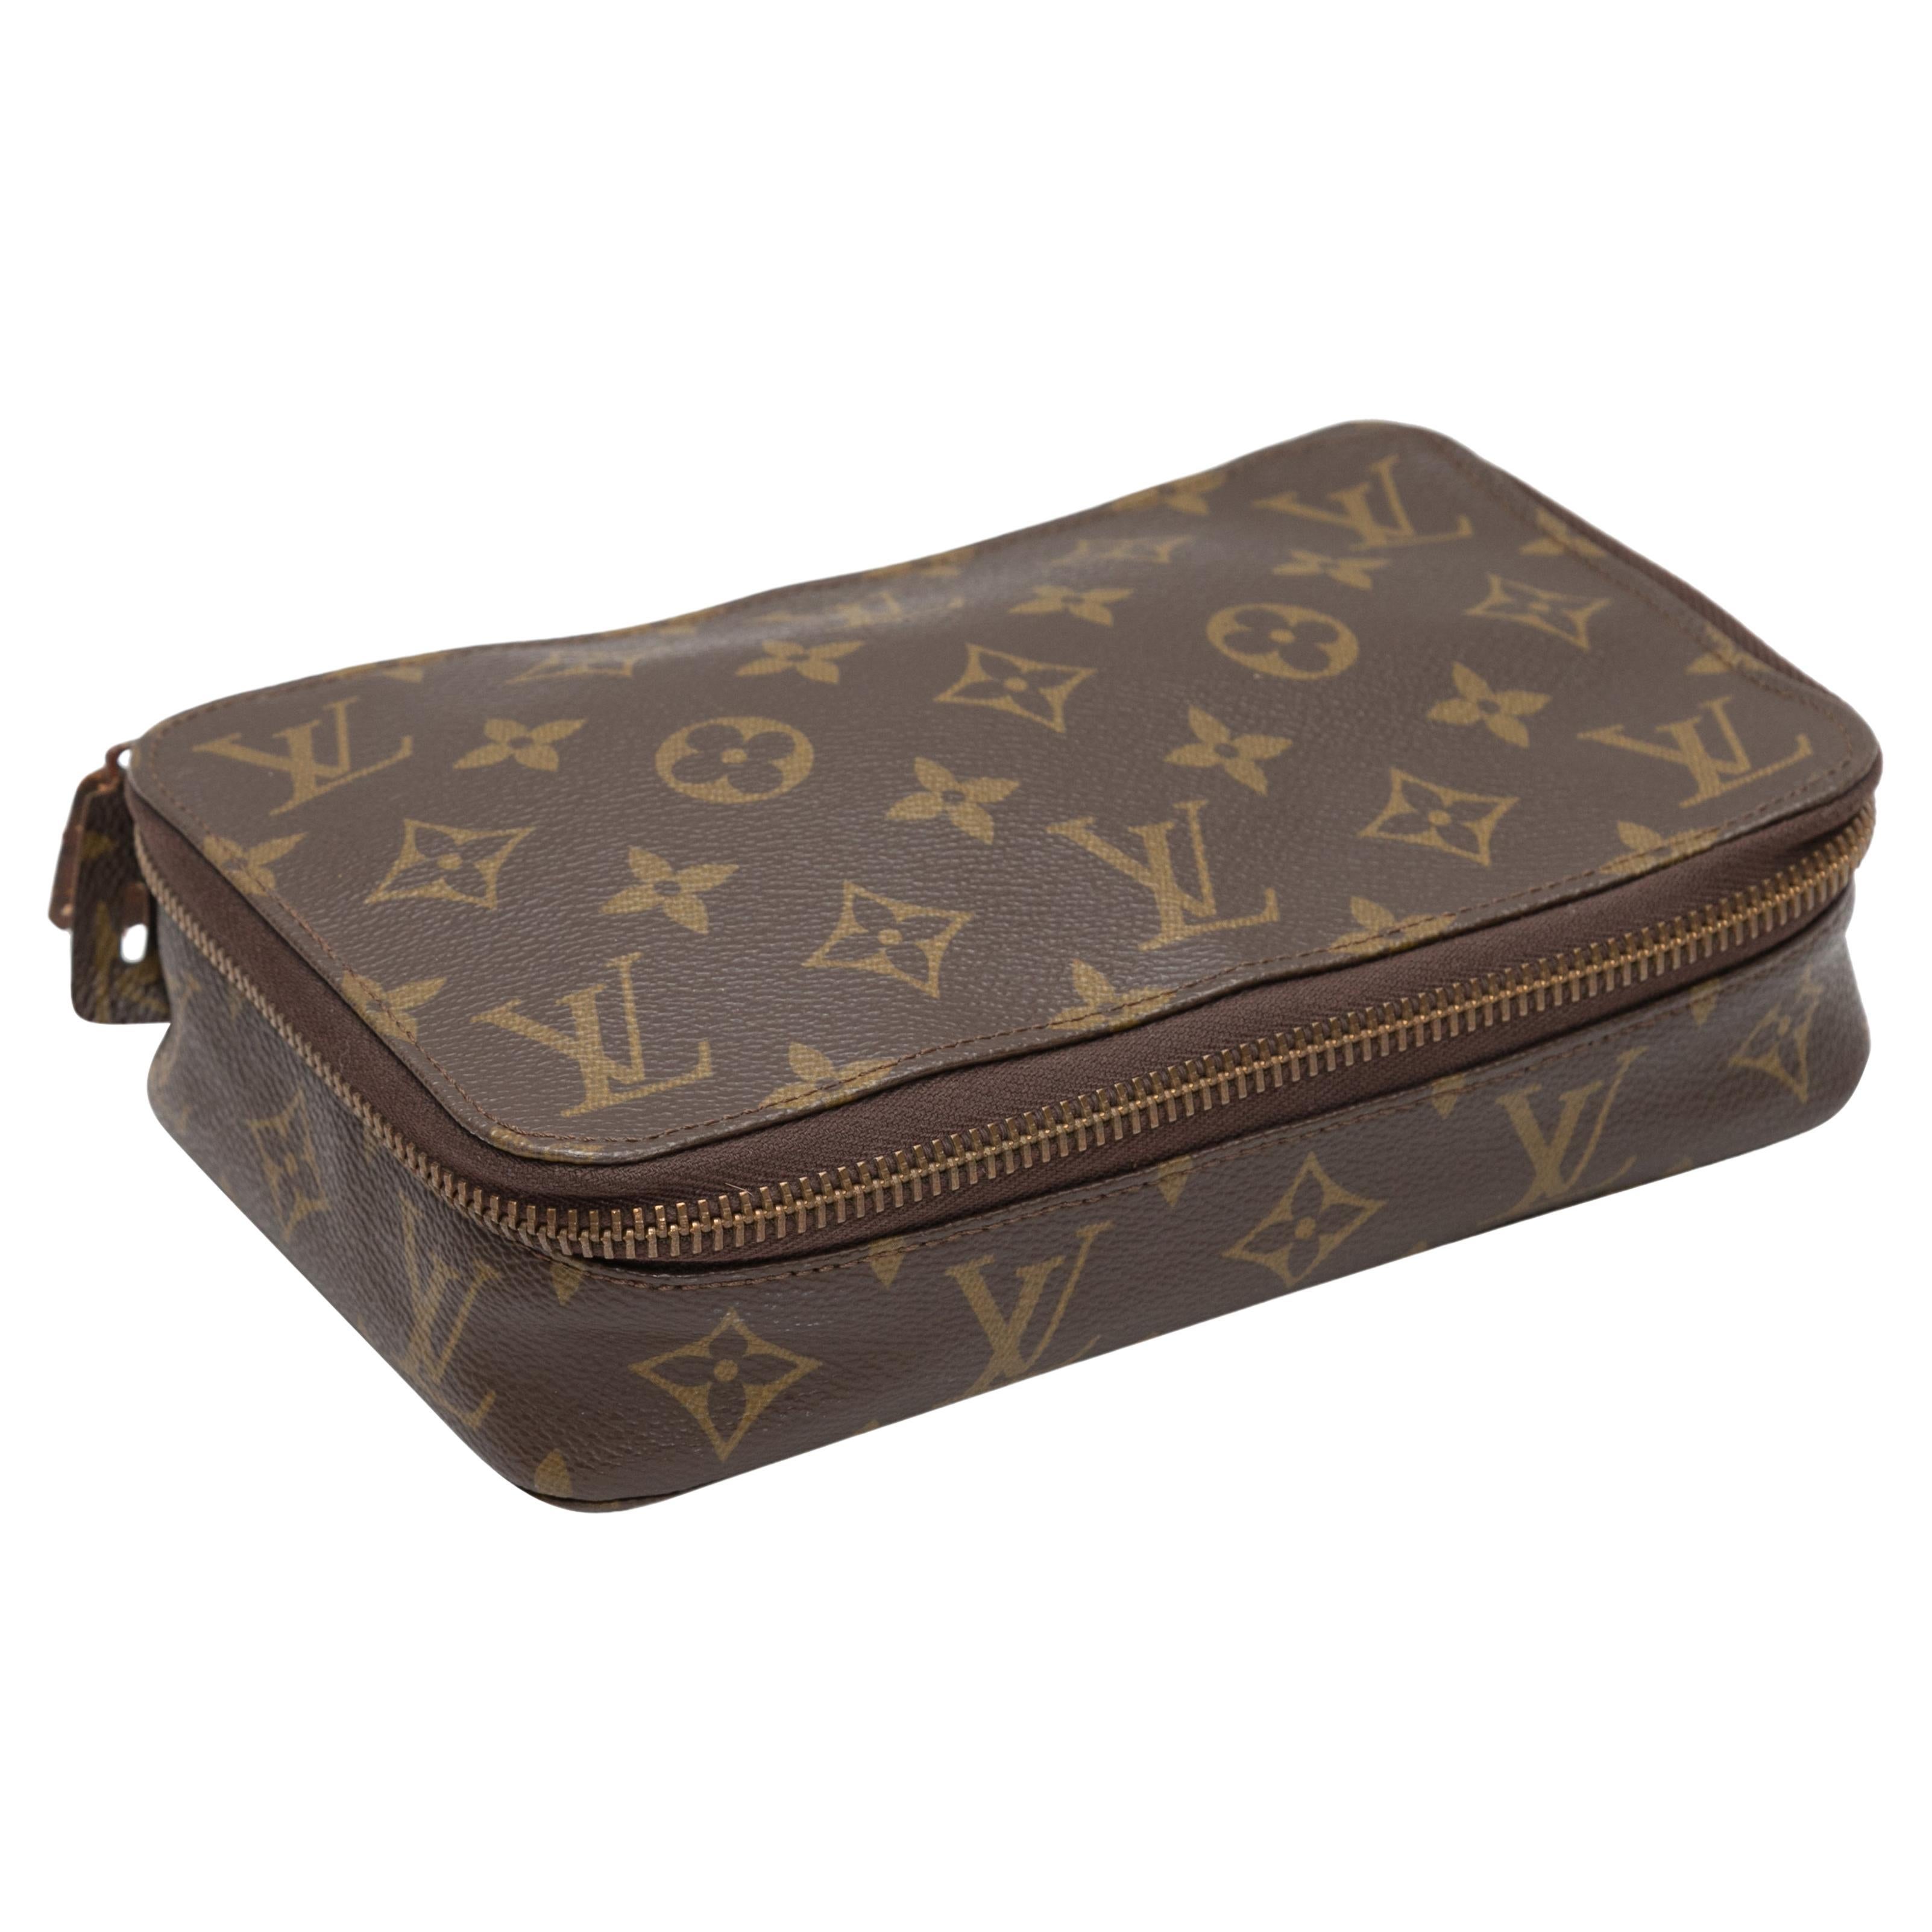 LOUIS VUITTON Vintage 'Excursion' Bag in Brown Monogram Canvas and Leather  For Sale at 1stDibs